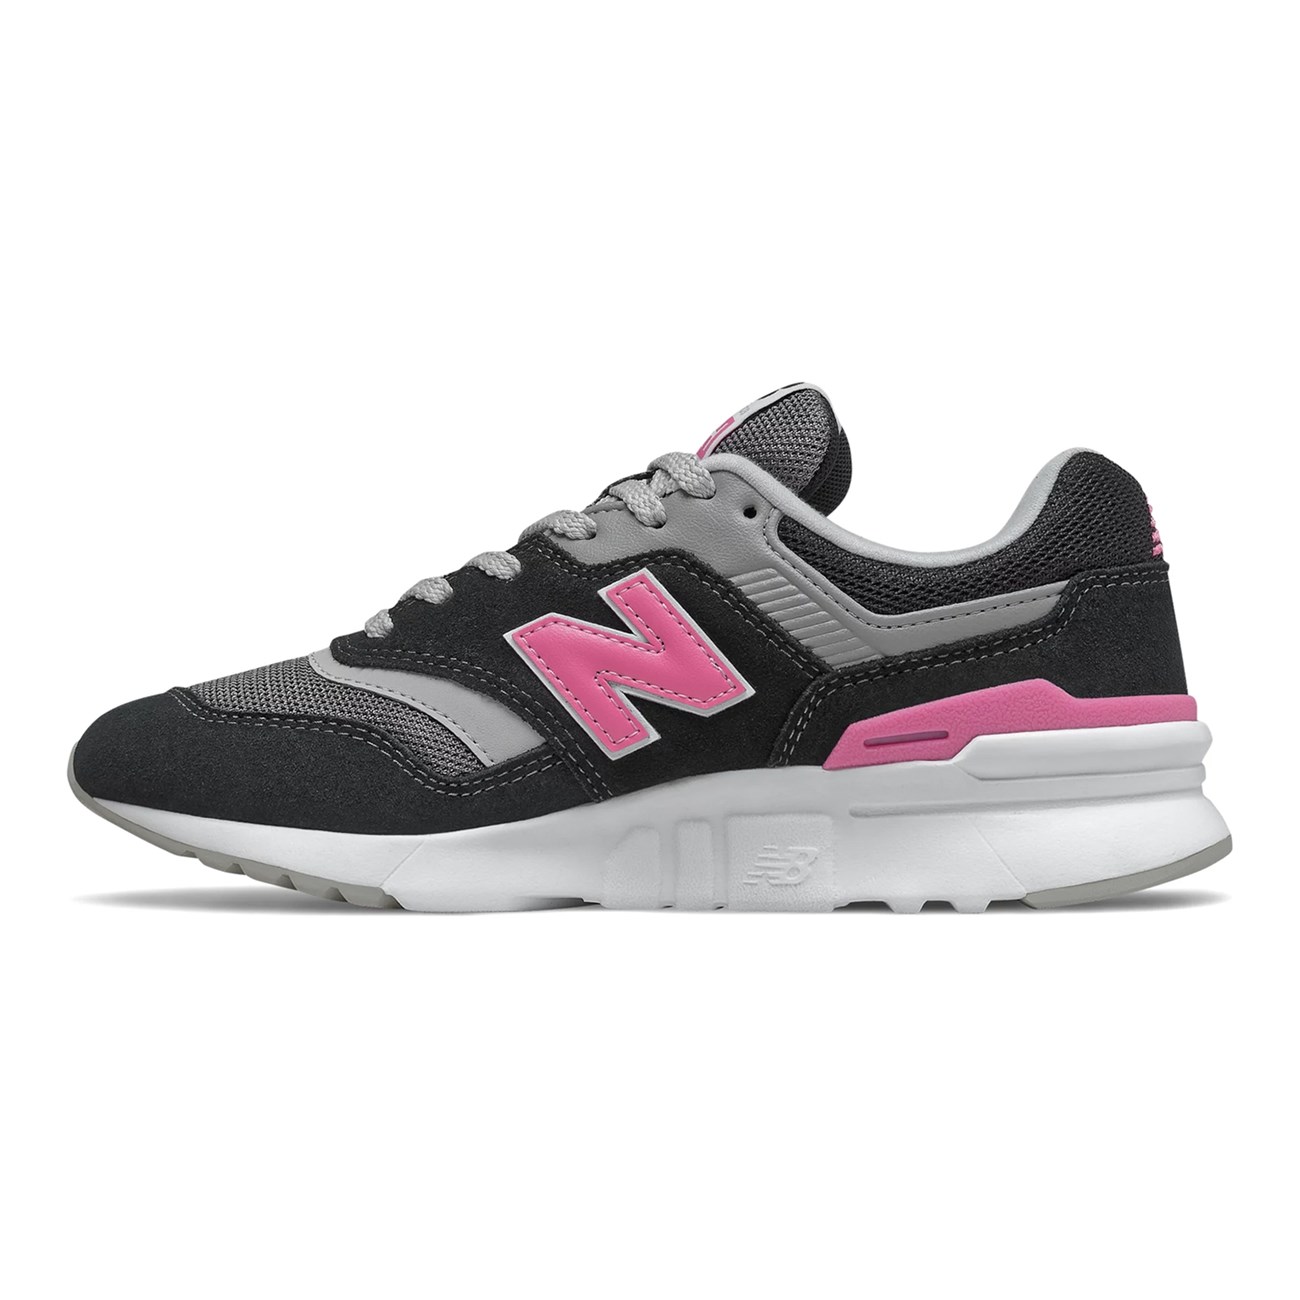 NEW BALANCE Γυναικεία Sneakers 997 CW997HVL-0012 - The Athlete's Foot